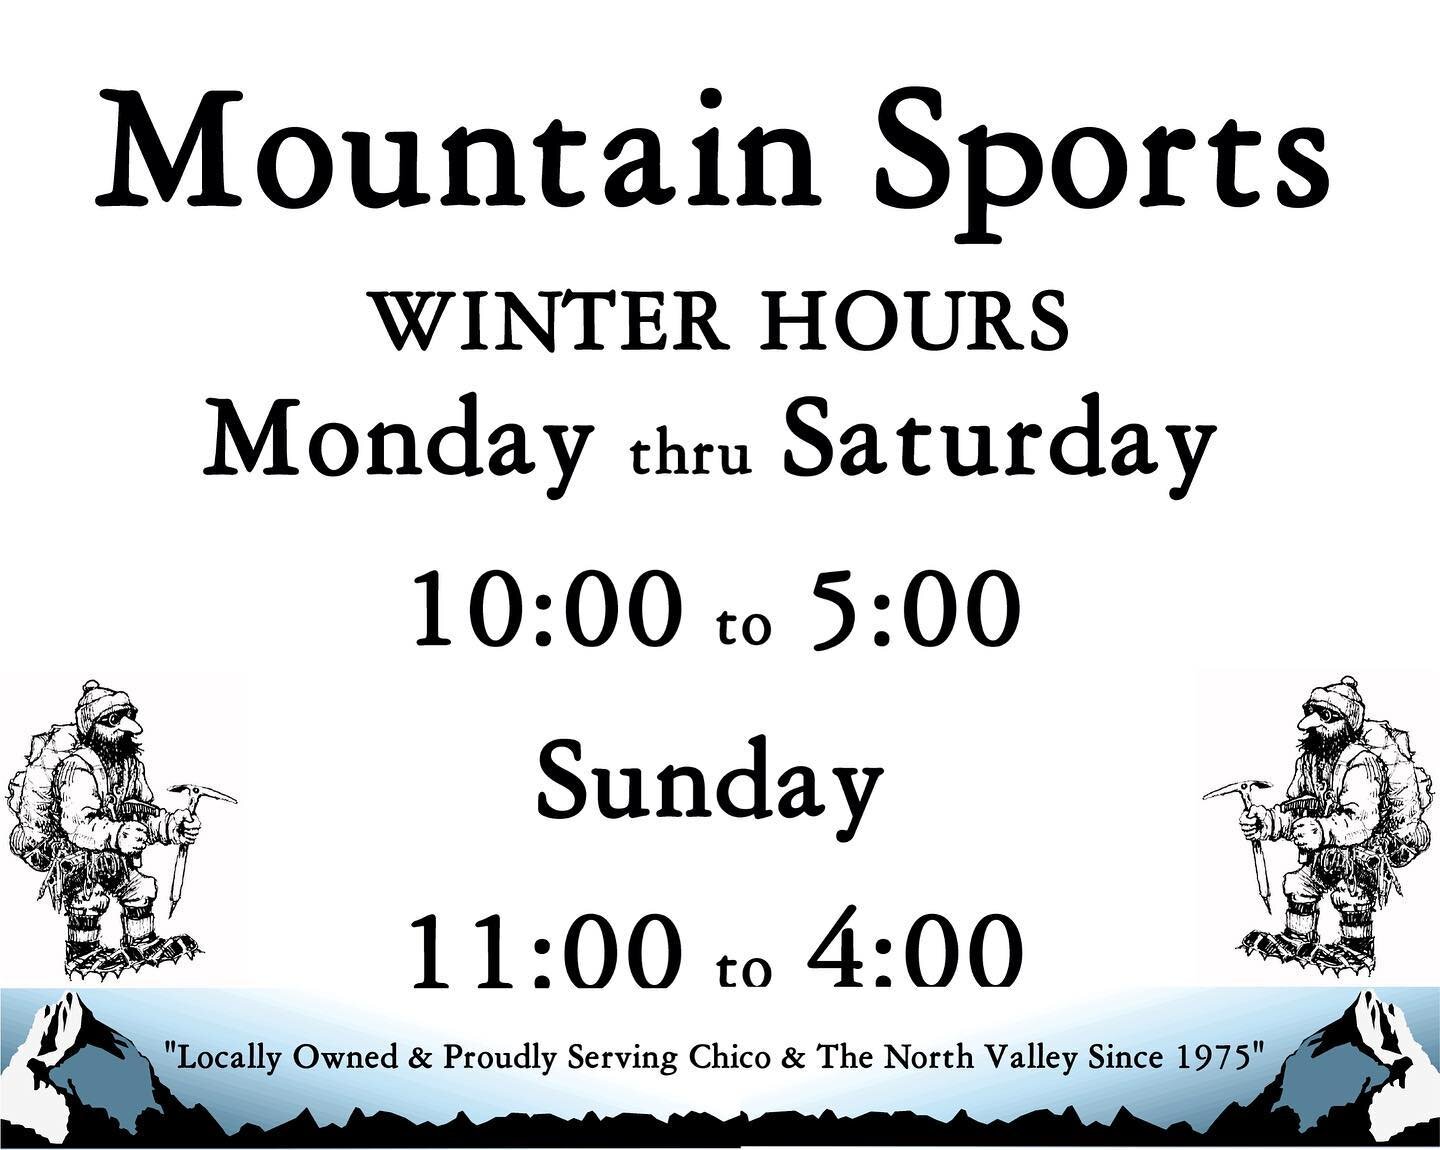 Please note that we have made slight changes to our winter closing hours.  Hopefully this won't be too much of an inconvenience.